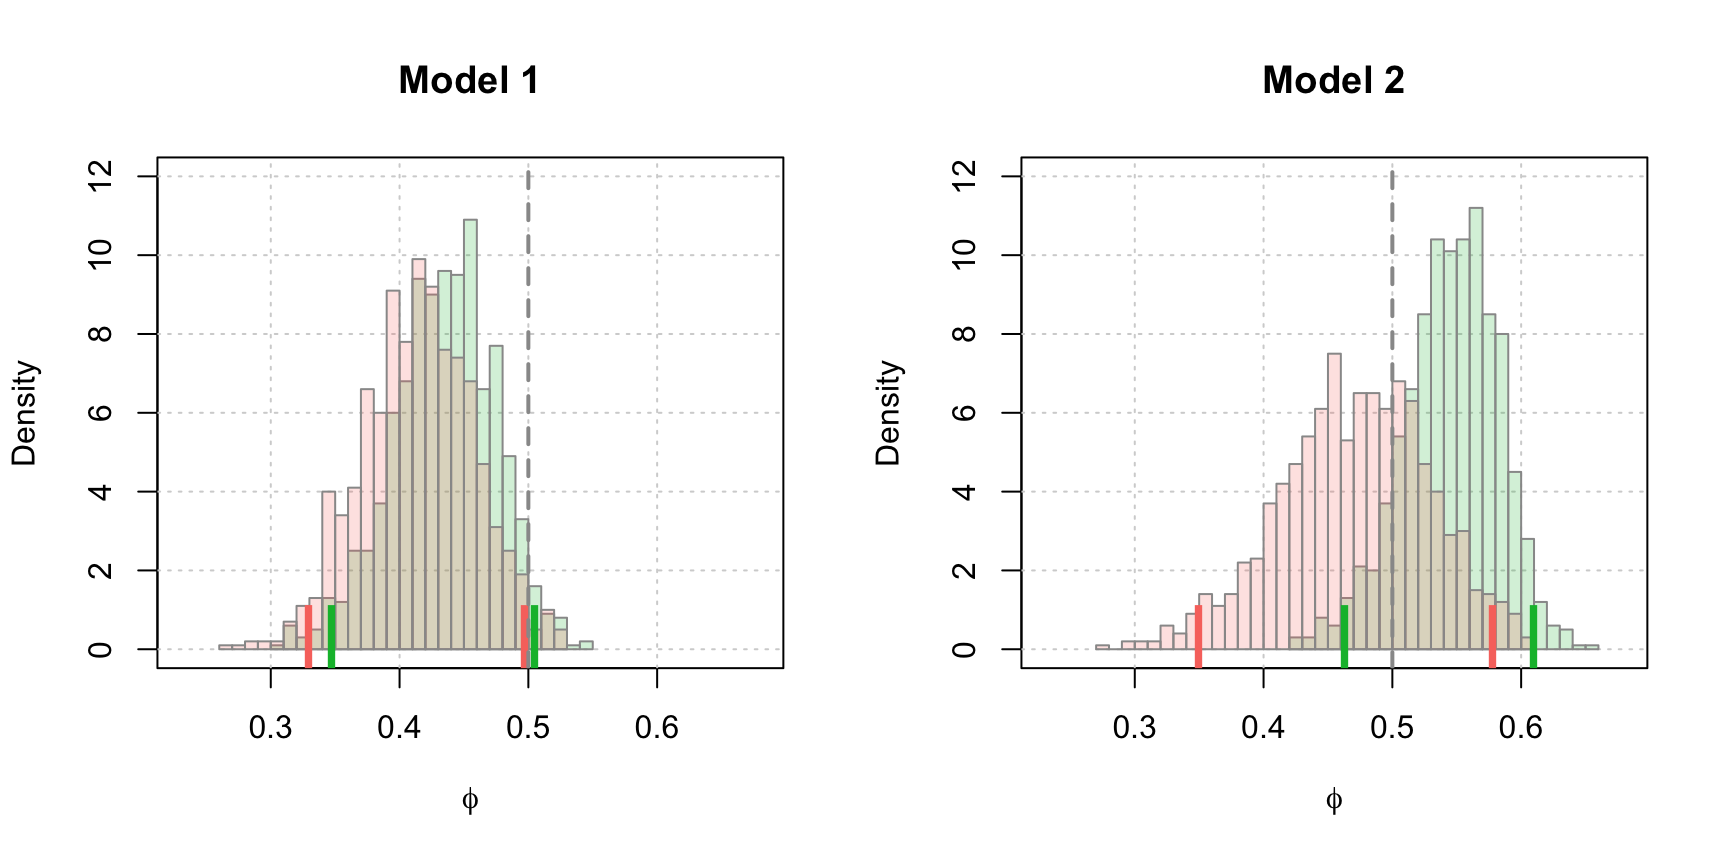 Estimated parametric and non-parametric blockbootstrap distributions of $\hat{\phi}$ for the MLE parameter estimates. The histogram bars represent the empirical results from the bootstraps with the green representing parametric bootstrap and the red representing the block bootstrap approach. The dashed vertical line represents the true value of $\phi$ and the vertical ticks correspond to the limits of the 95% confidence intervals for both estimation techniques.